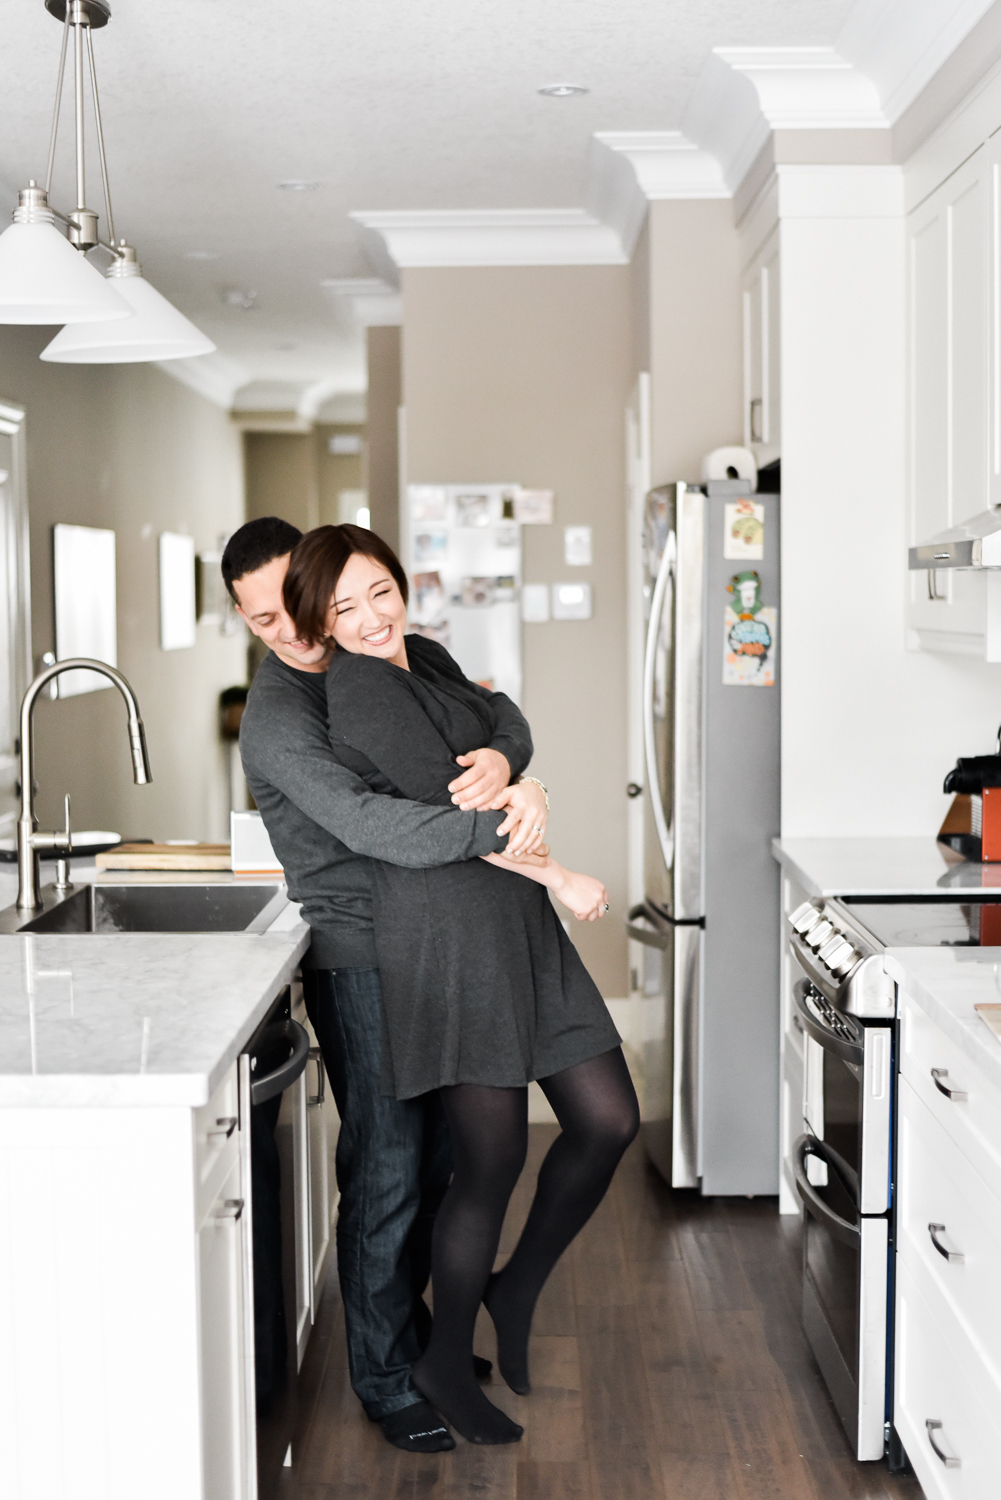 Candid engagement photo in kitchen with couple